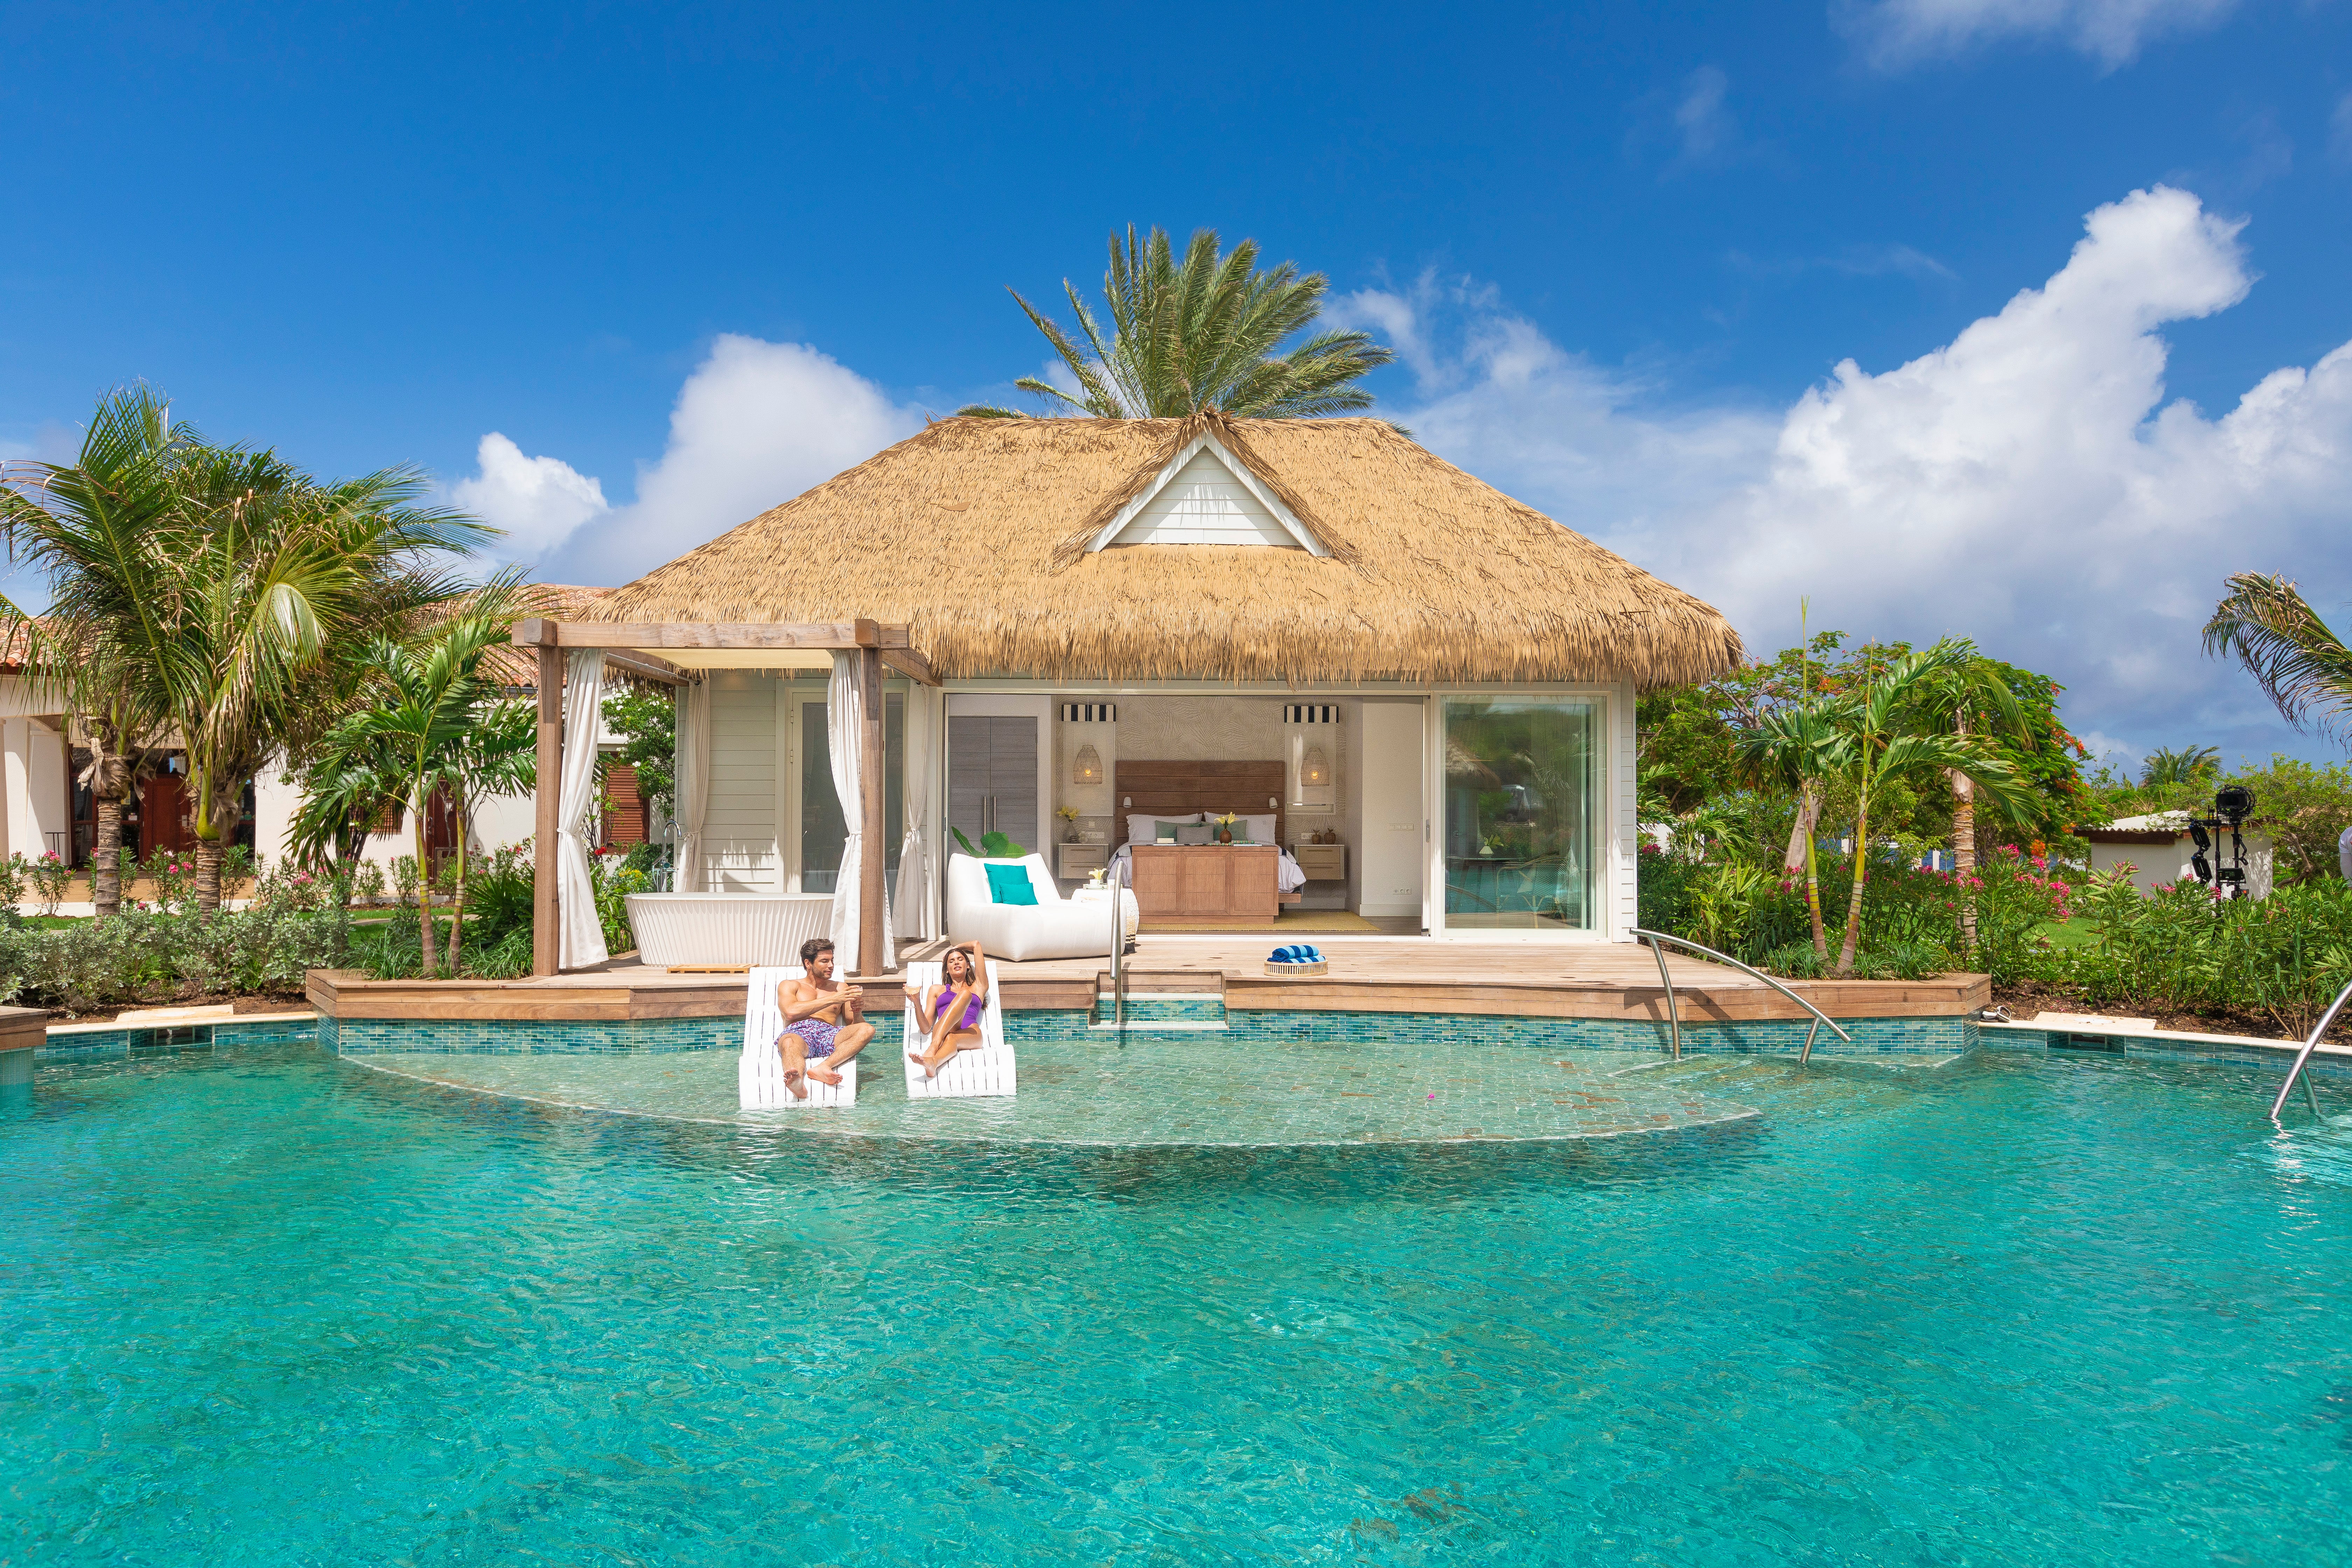 From swim-up suites to over-water villas, Sandals stunning accommodation makes for an unforgettable stay